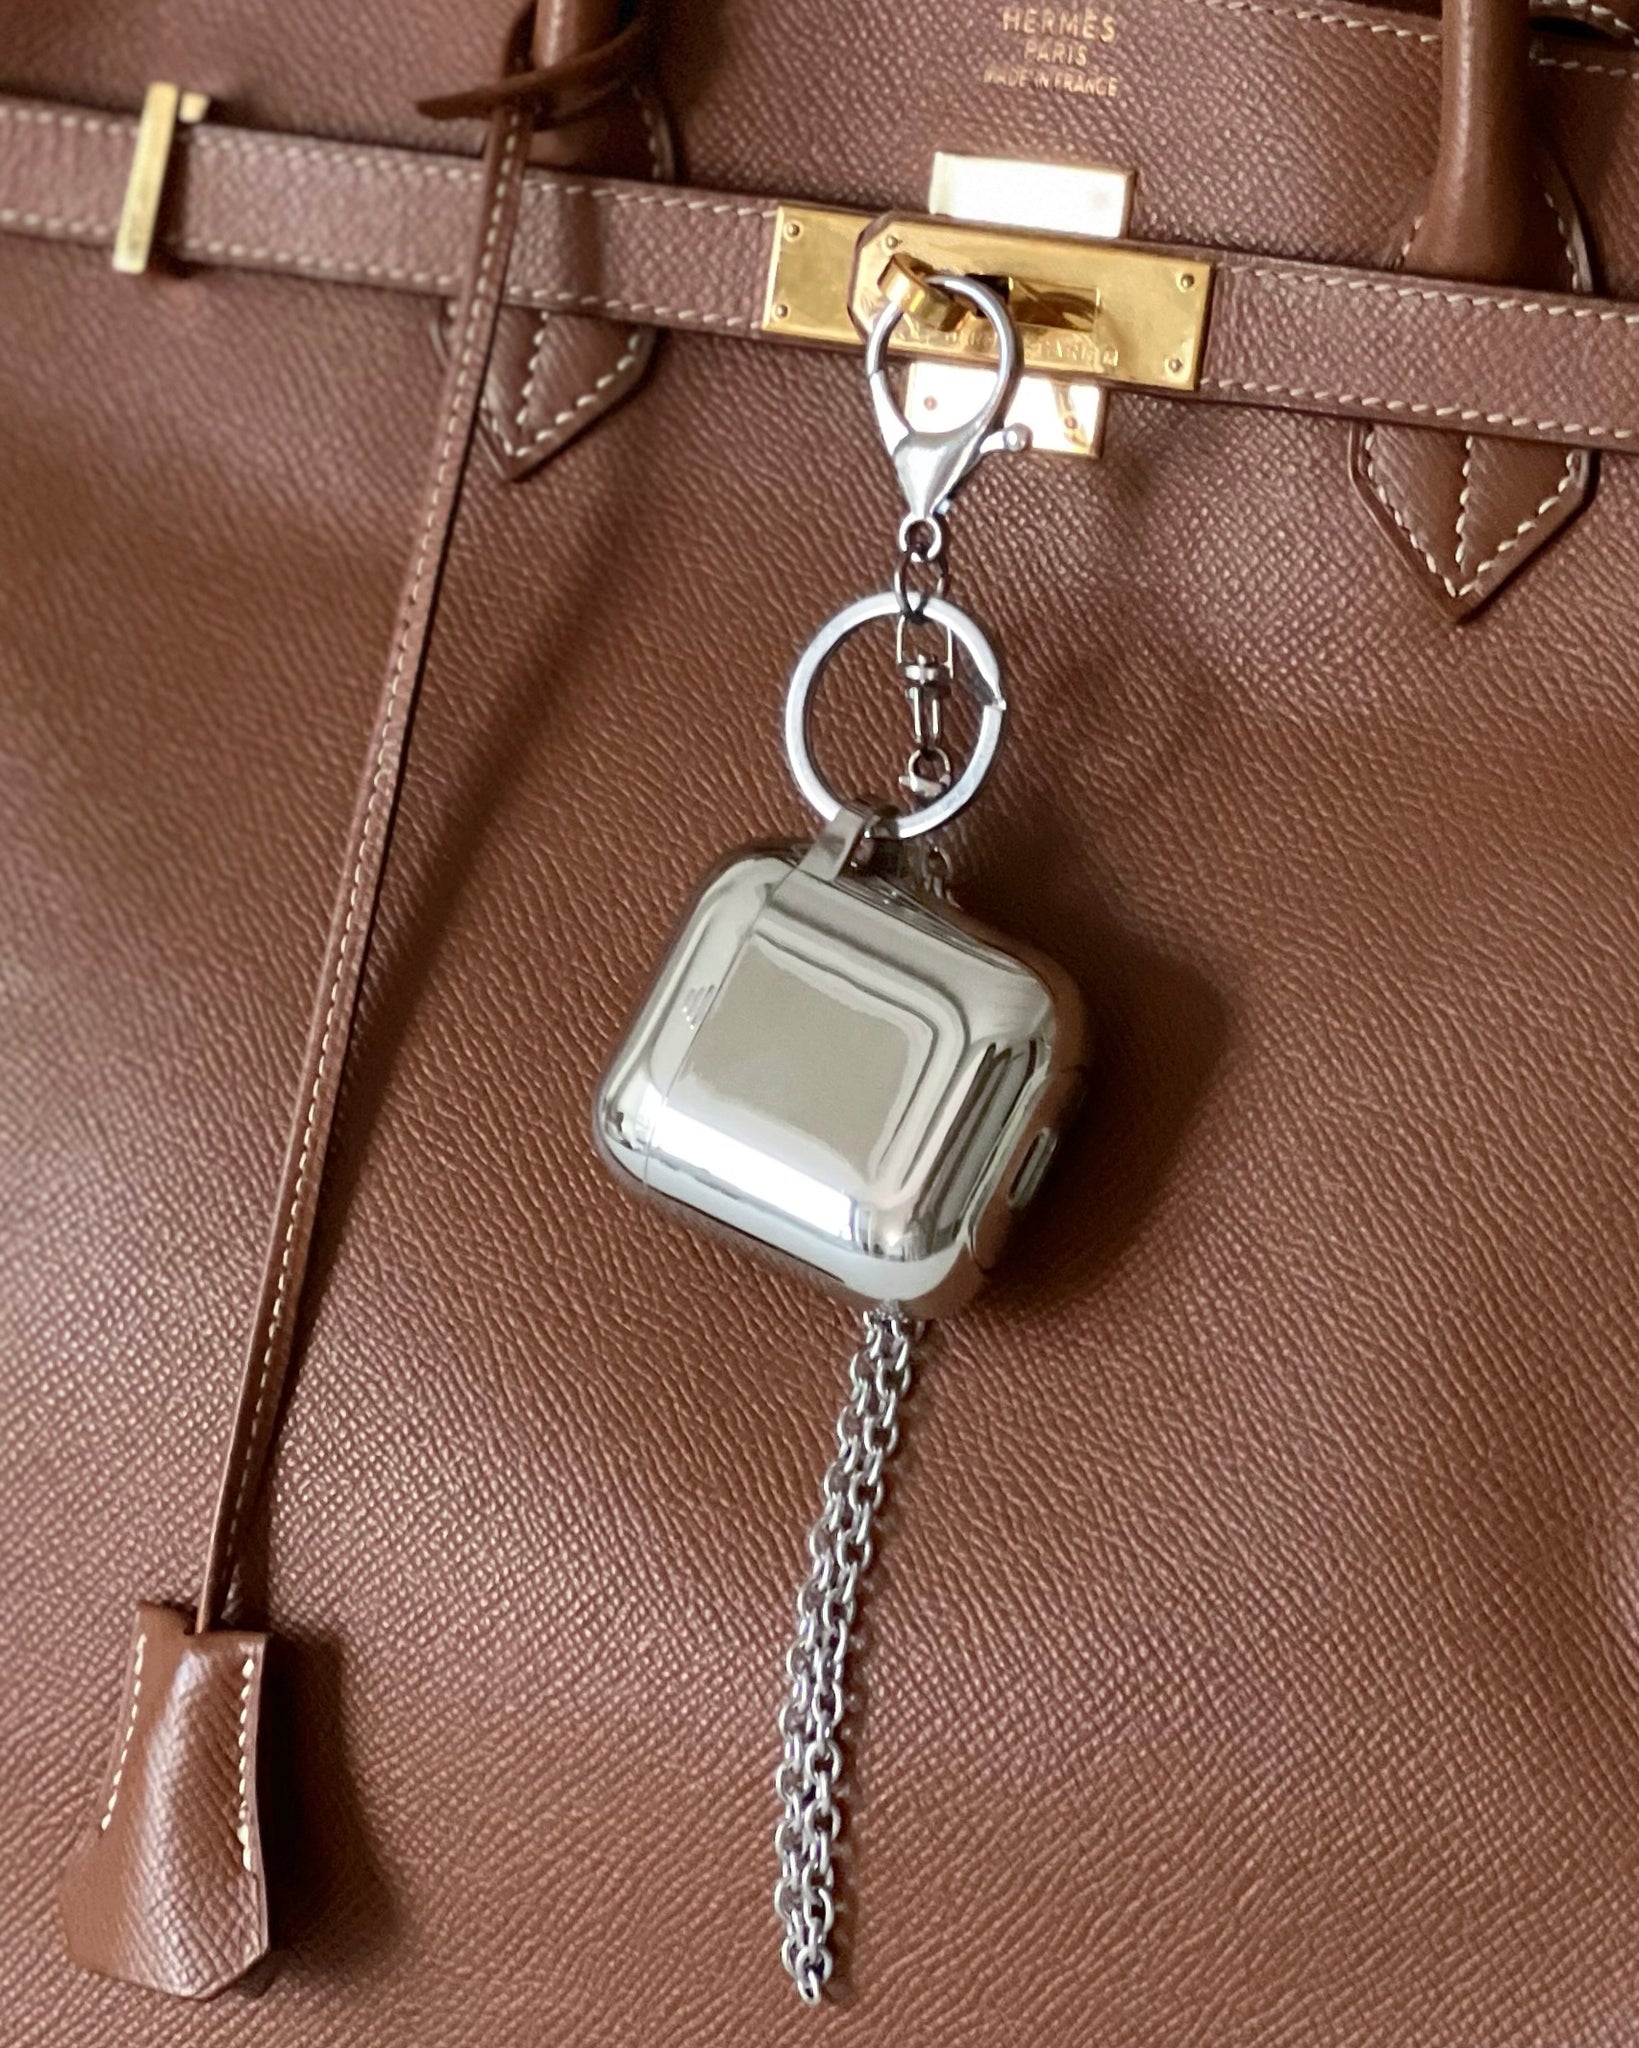 AirPods case with chain ver. 2